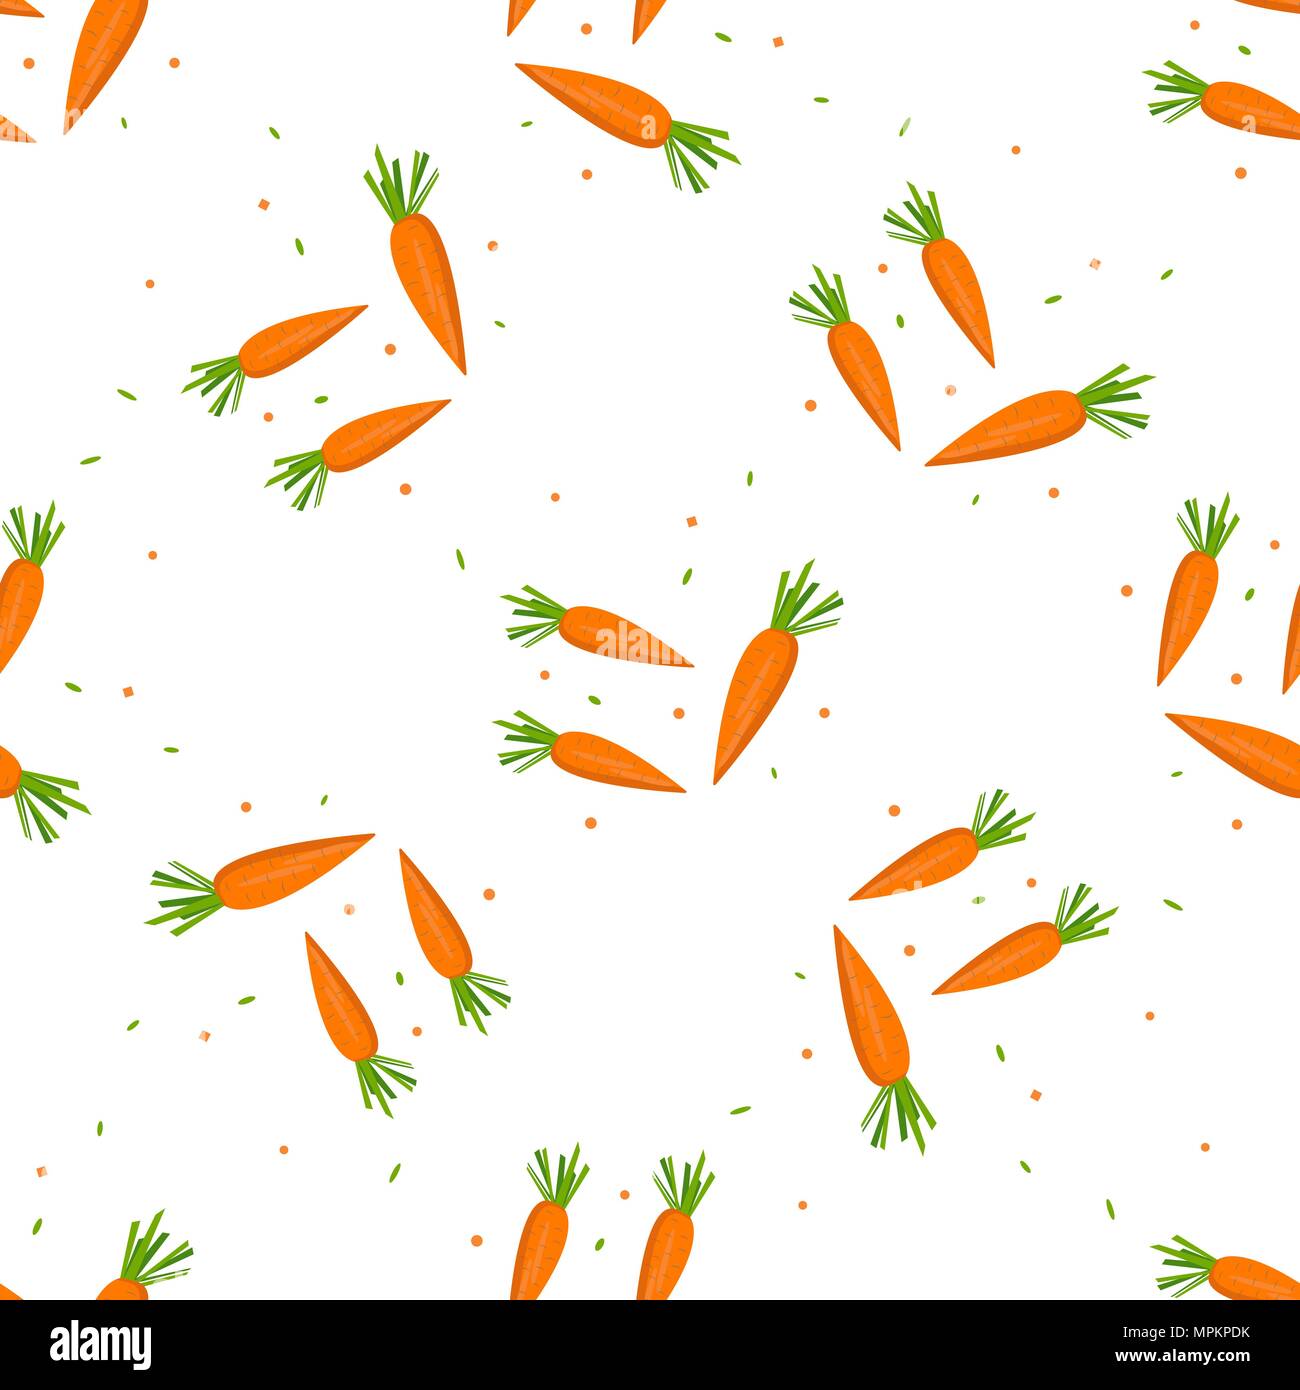 Vector seamless pattern with orange carrots on white background. Vegetable summer pattern, colorful print for design .Carrot pattern. eps 10 Stock Vector